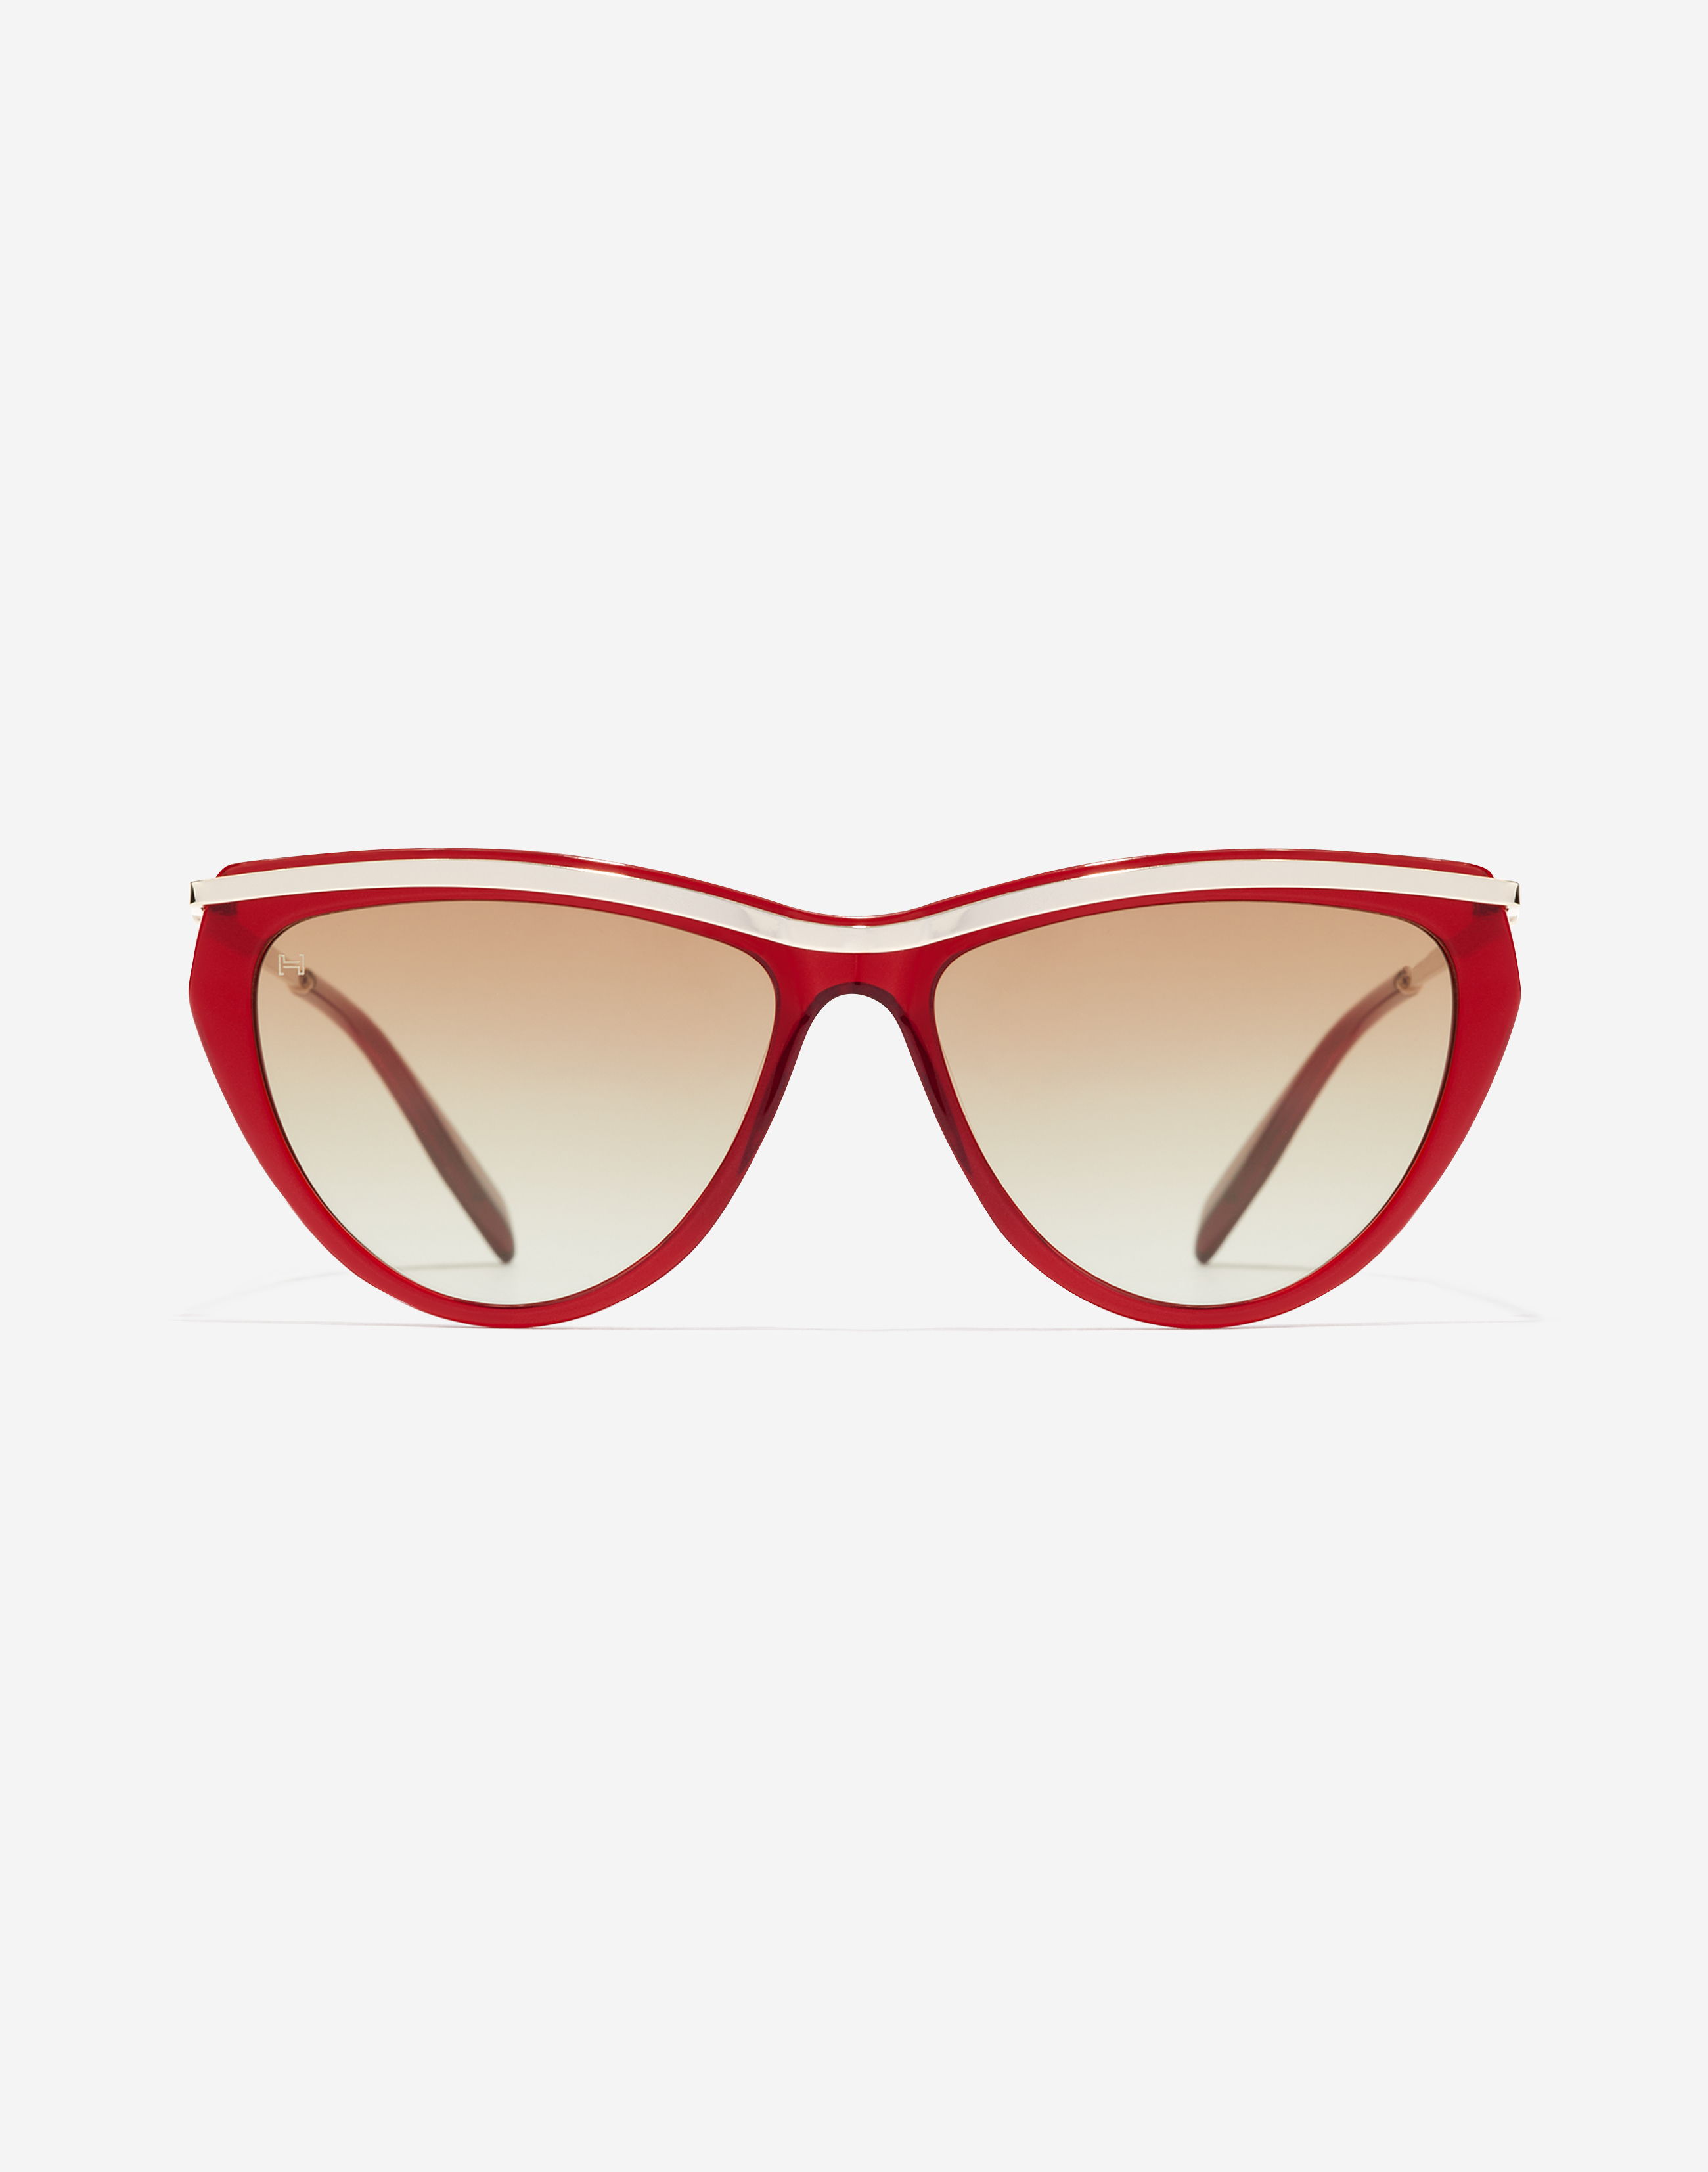 Hawkers BOW - CHERRY RED NATURE medium